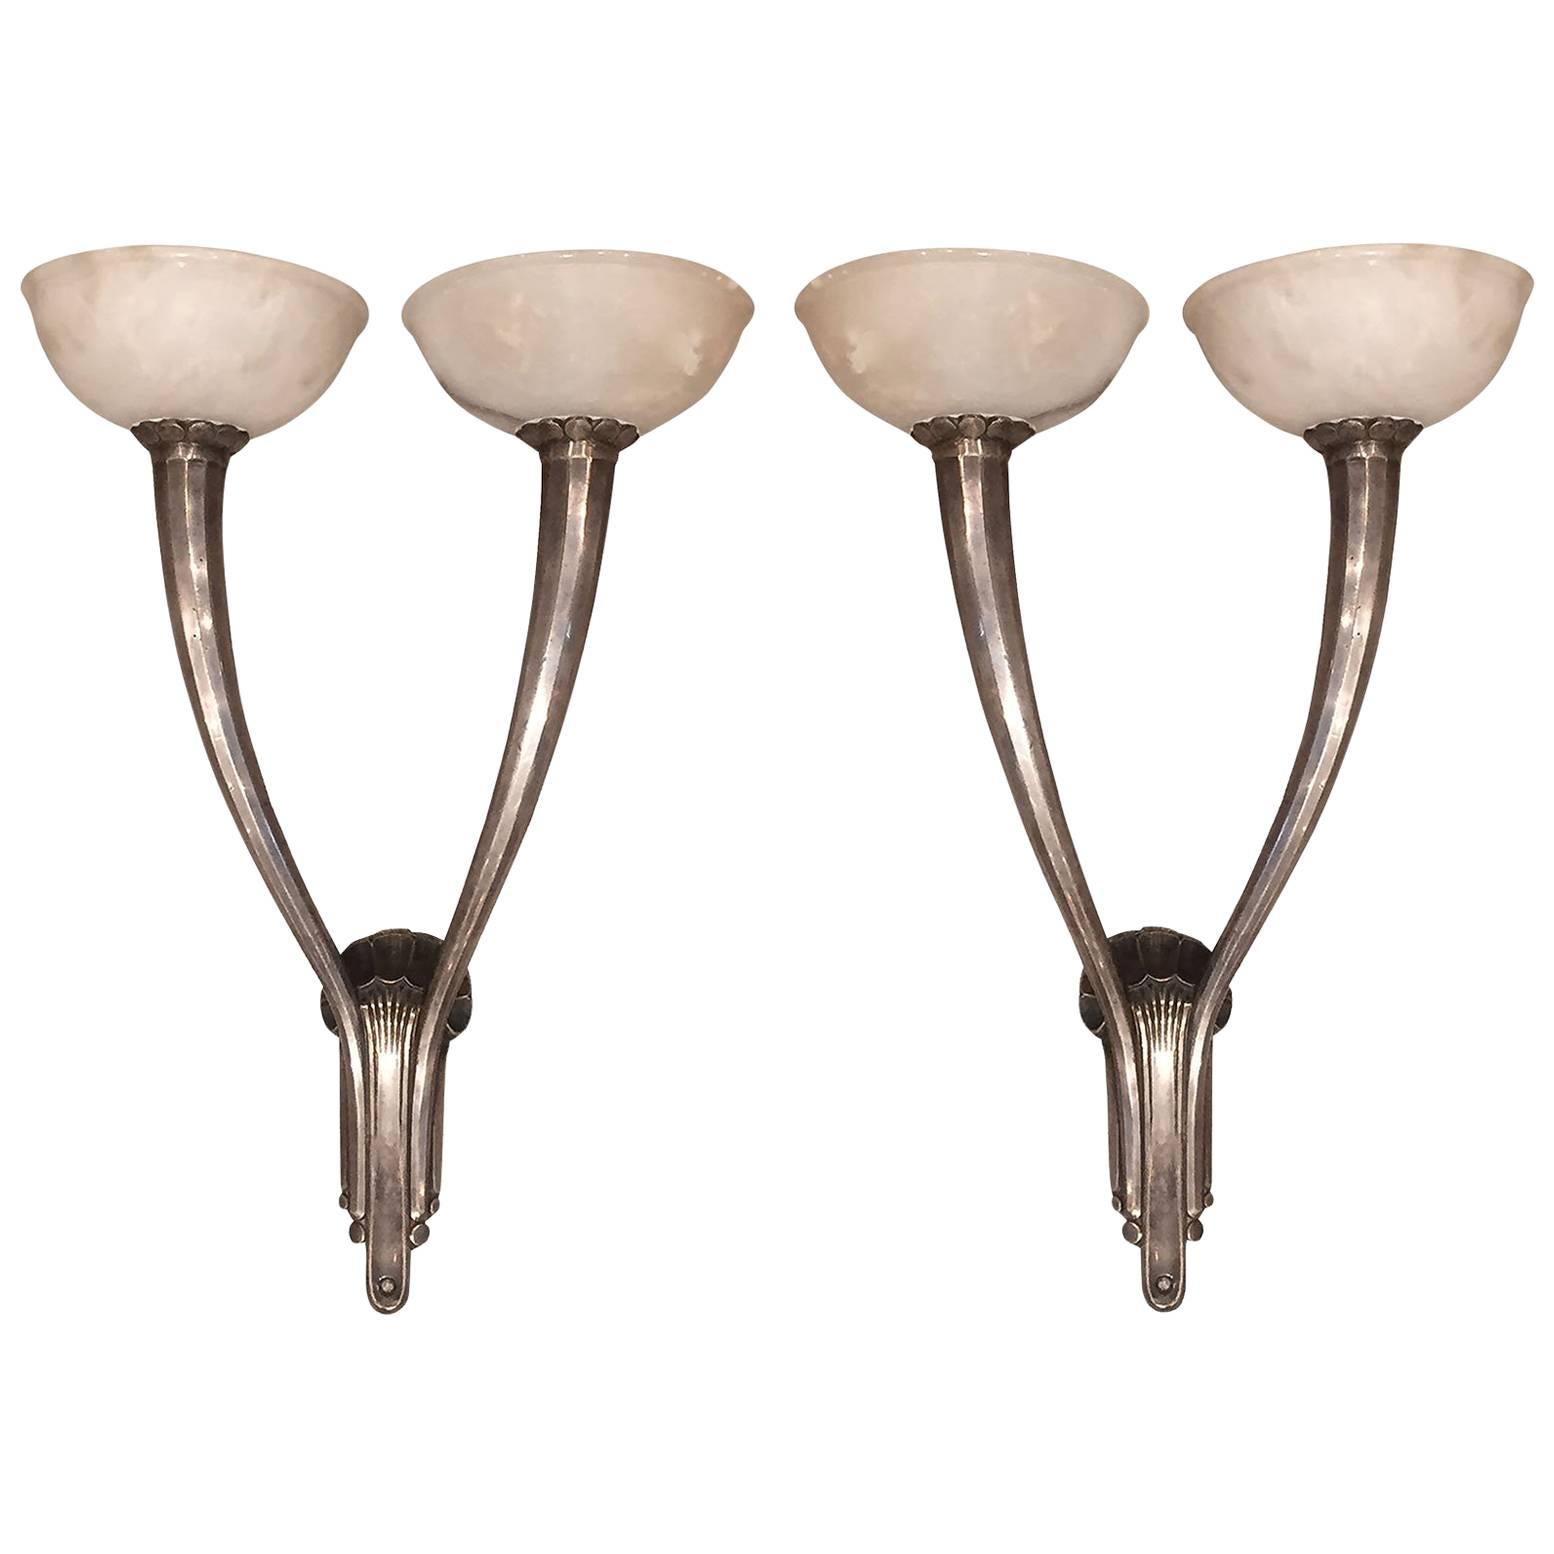 Pair of French Art Deco Silvered Bronze and Alabaster Wall Sconces